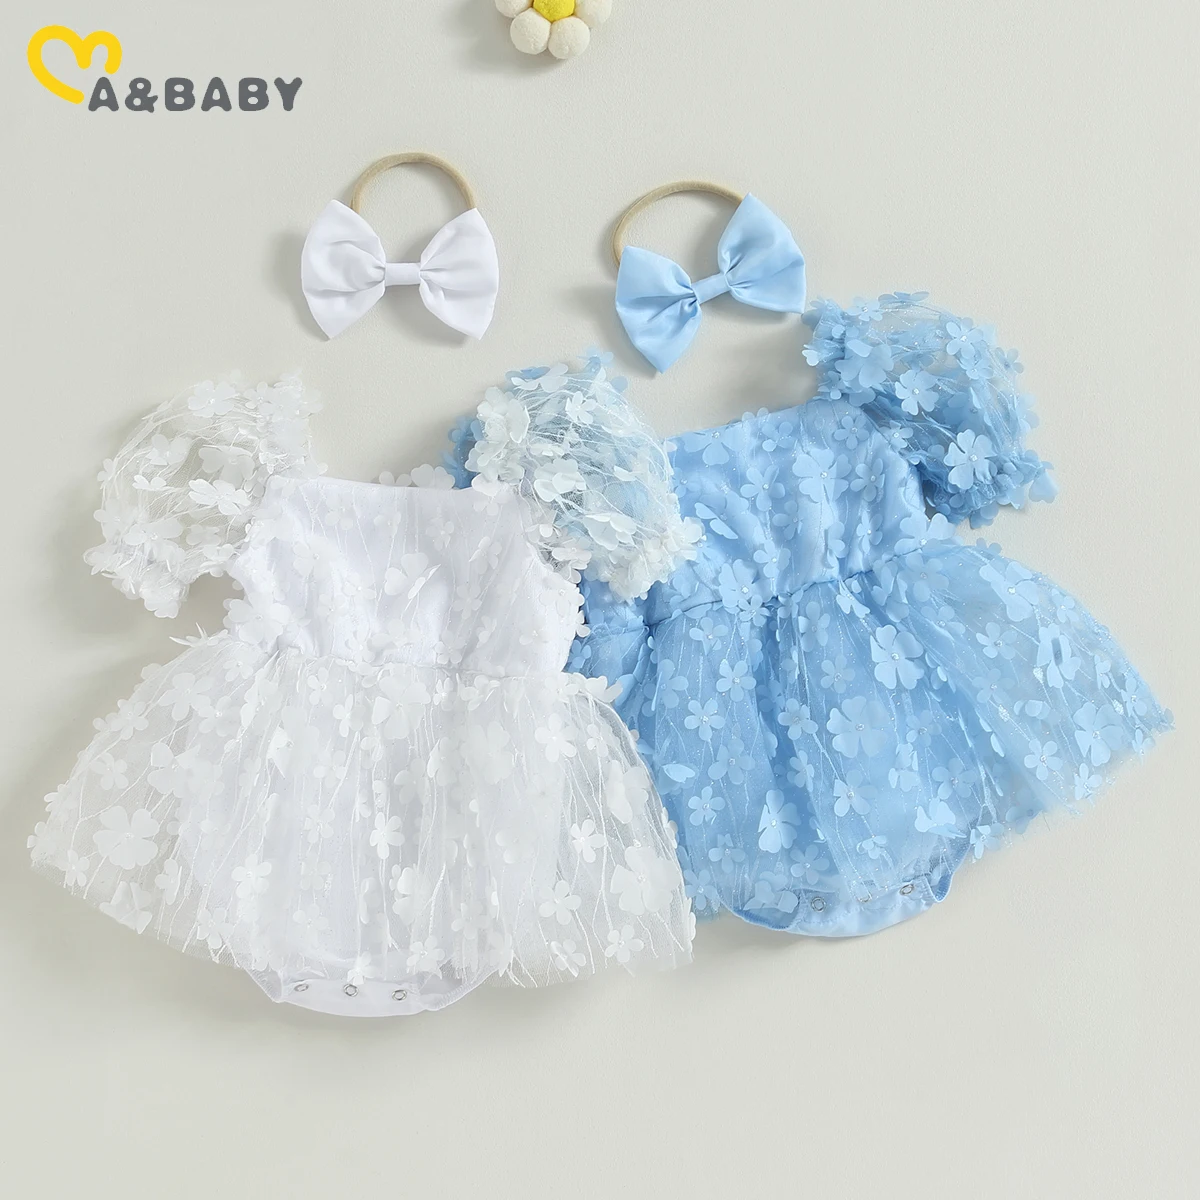 

ma&baby 0-18M Baby Girls Romper Toddler Newborn Infant Tulle Jumpsuit Floral Ruffles Sunsuit Playsuit Headband Birthday Outfits